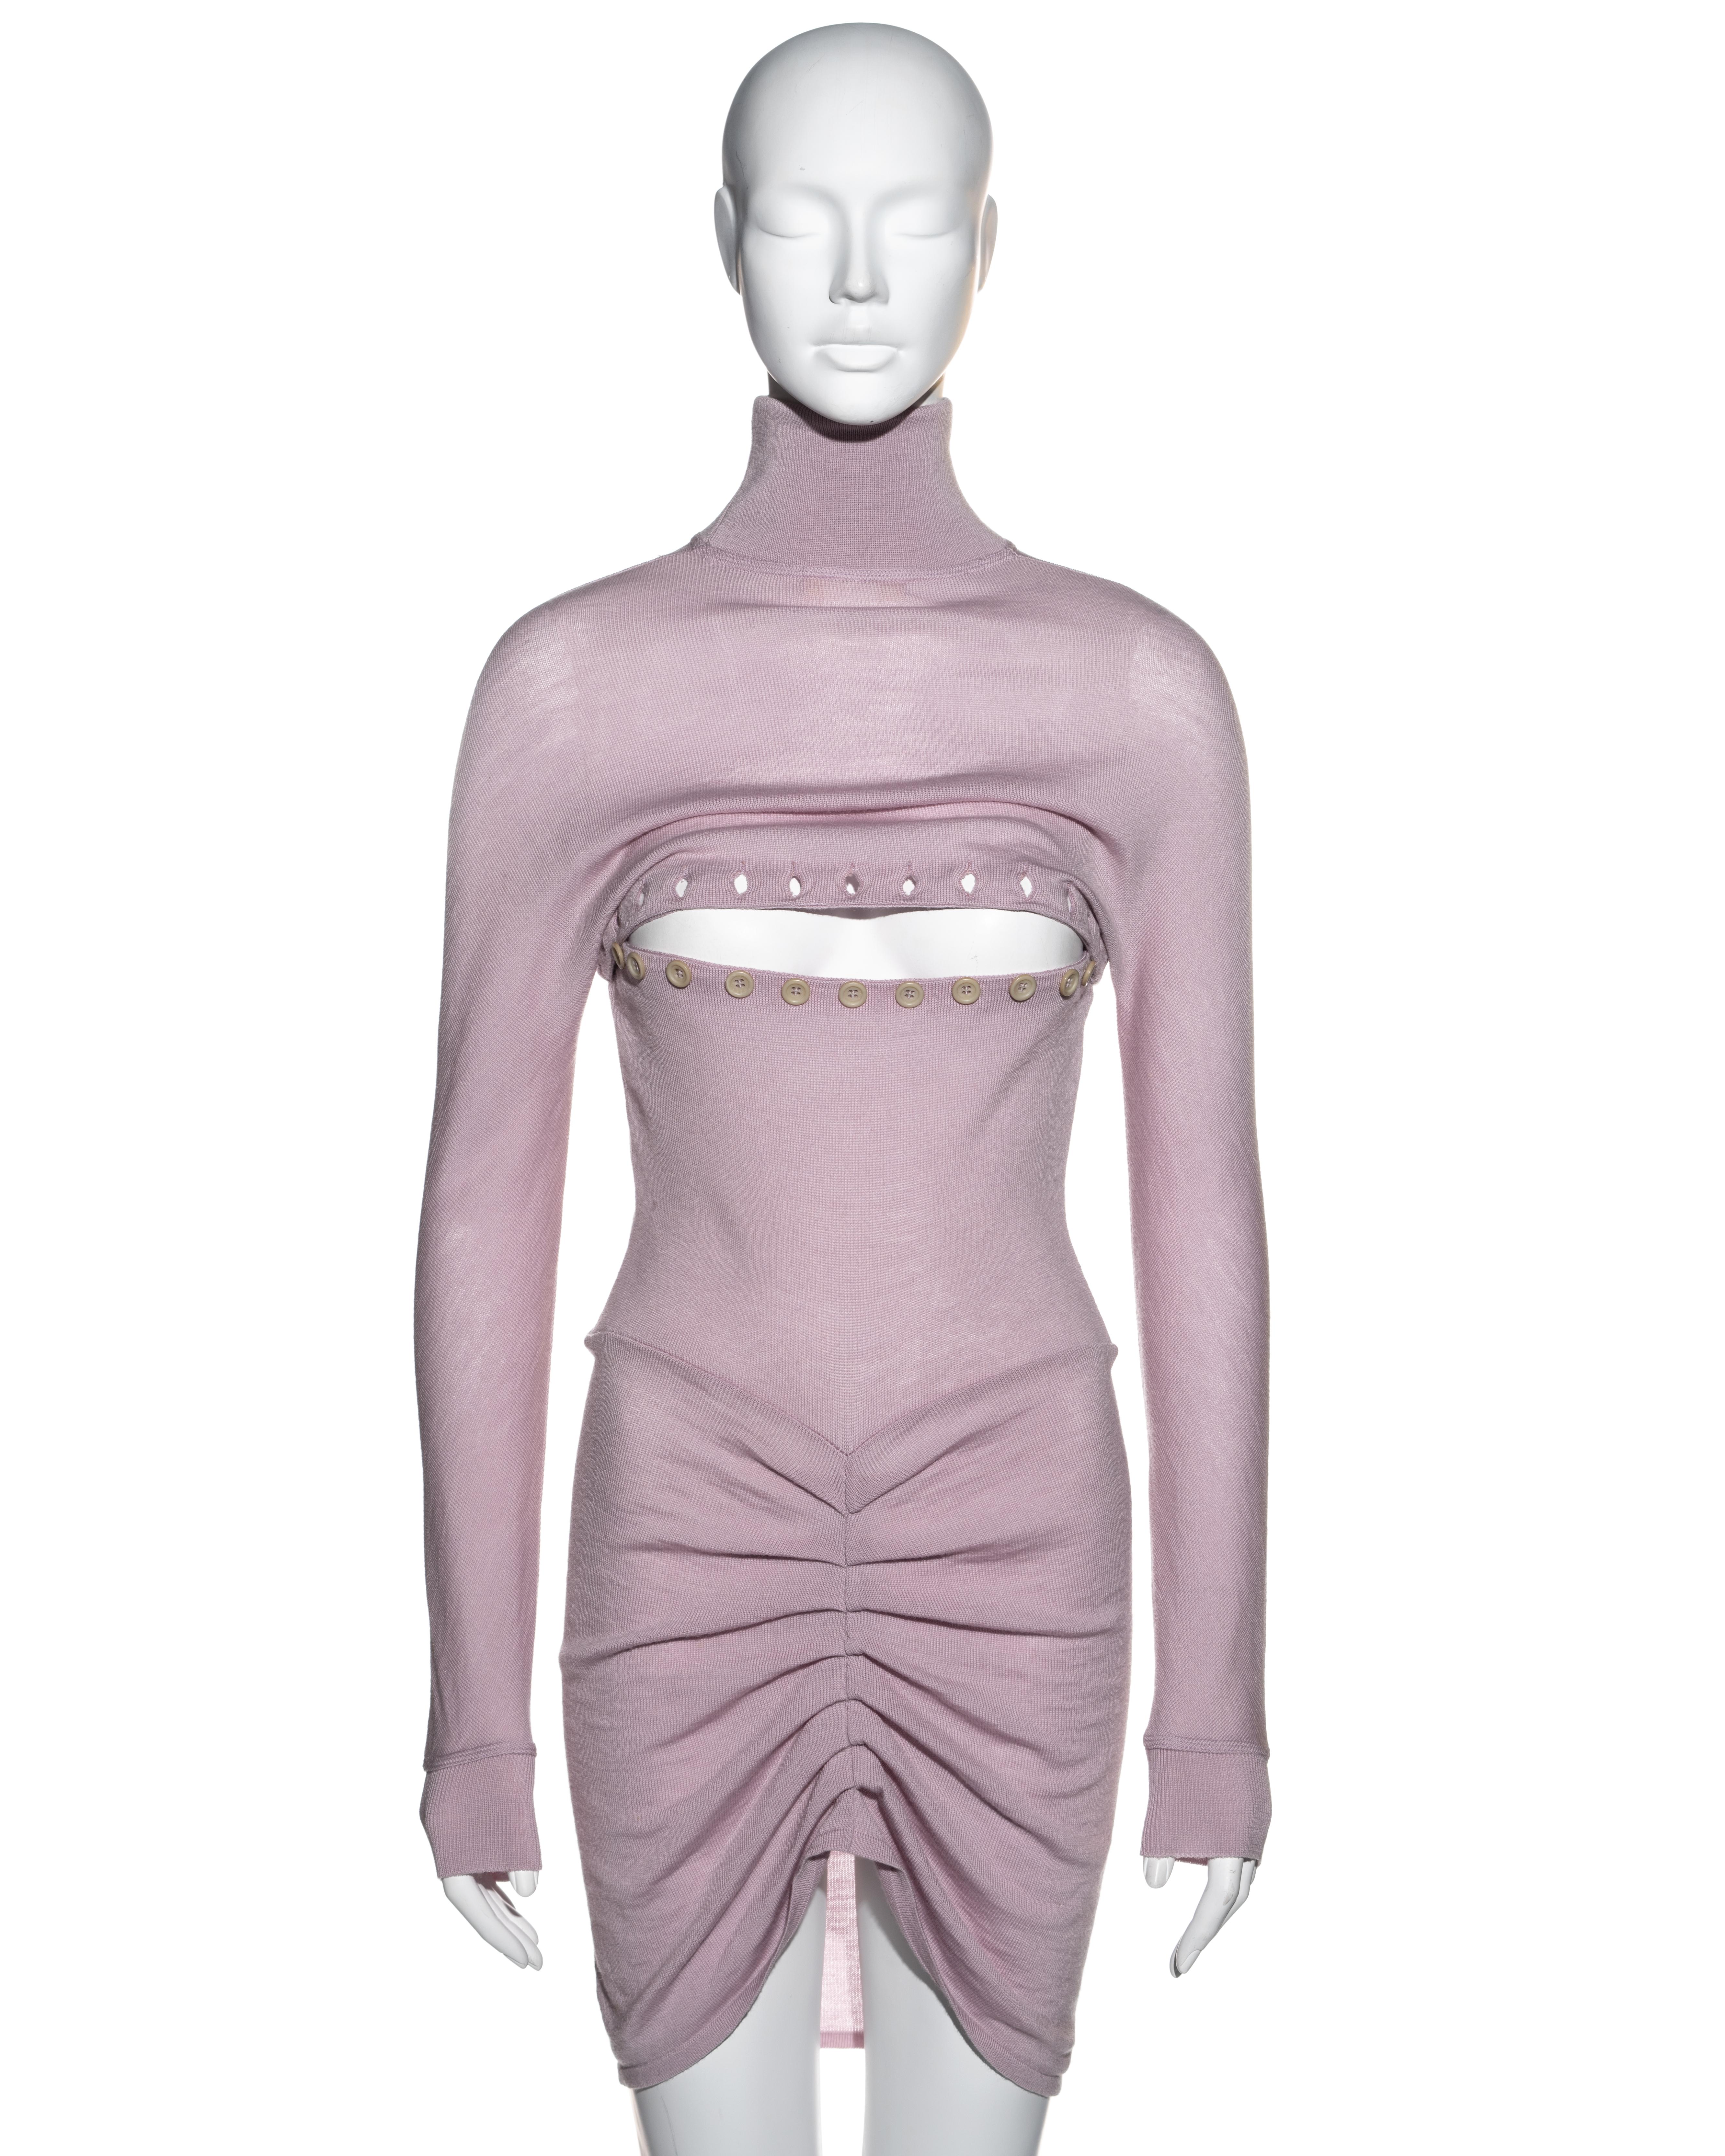 ▪ Alexander McQueen lilac wool sweater dress
▪ Turtleneck 
▪ Opening across bust line fastening with multiple buttons
▪ Pleated seam at centre-back 
▪ Worn back to front on the runway and in images 1 and 3
▪ Dante collection
▪ Size Medium
▪